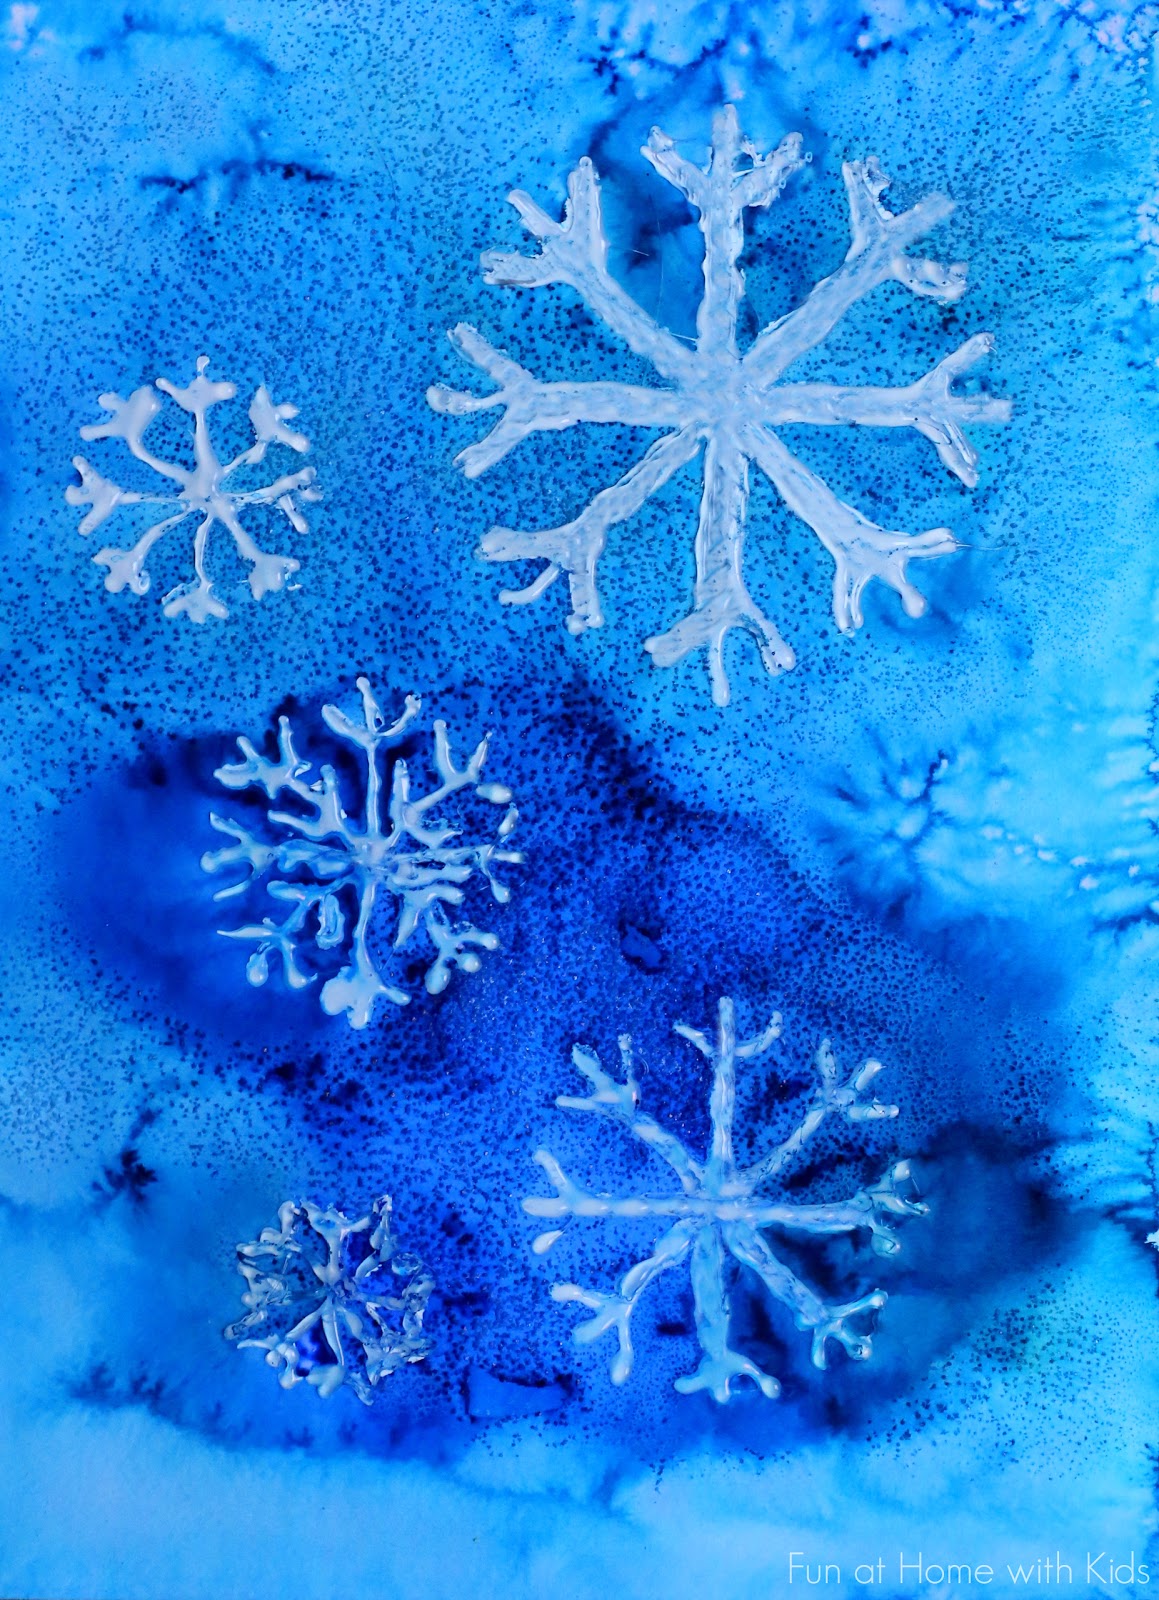 23 Easy Snowflake Crafts For Fun Winter Activities - Crafty Art Ideas